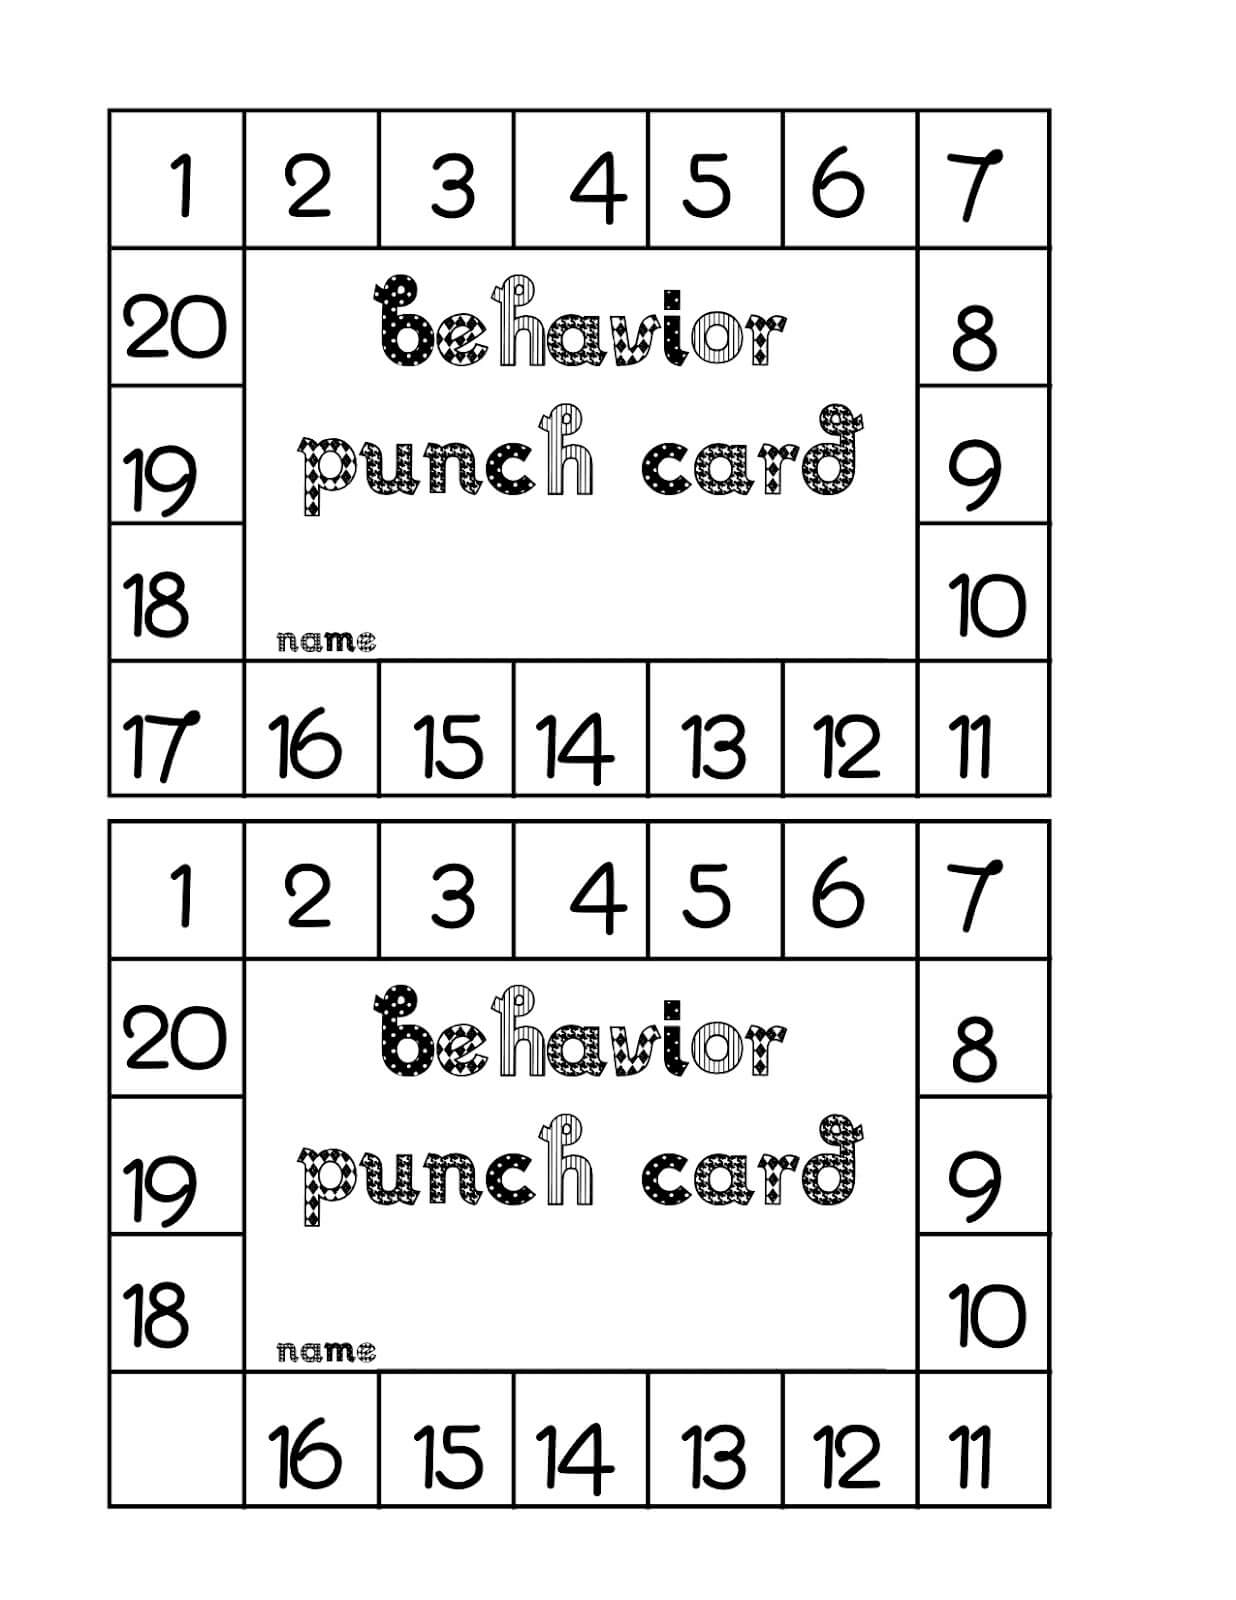 Punch Card Template Free ] – Free Printable Punch Card Pertaining To Free Printable Punch Card Template